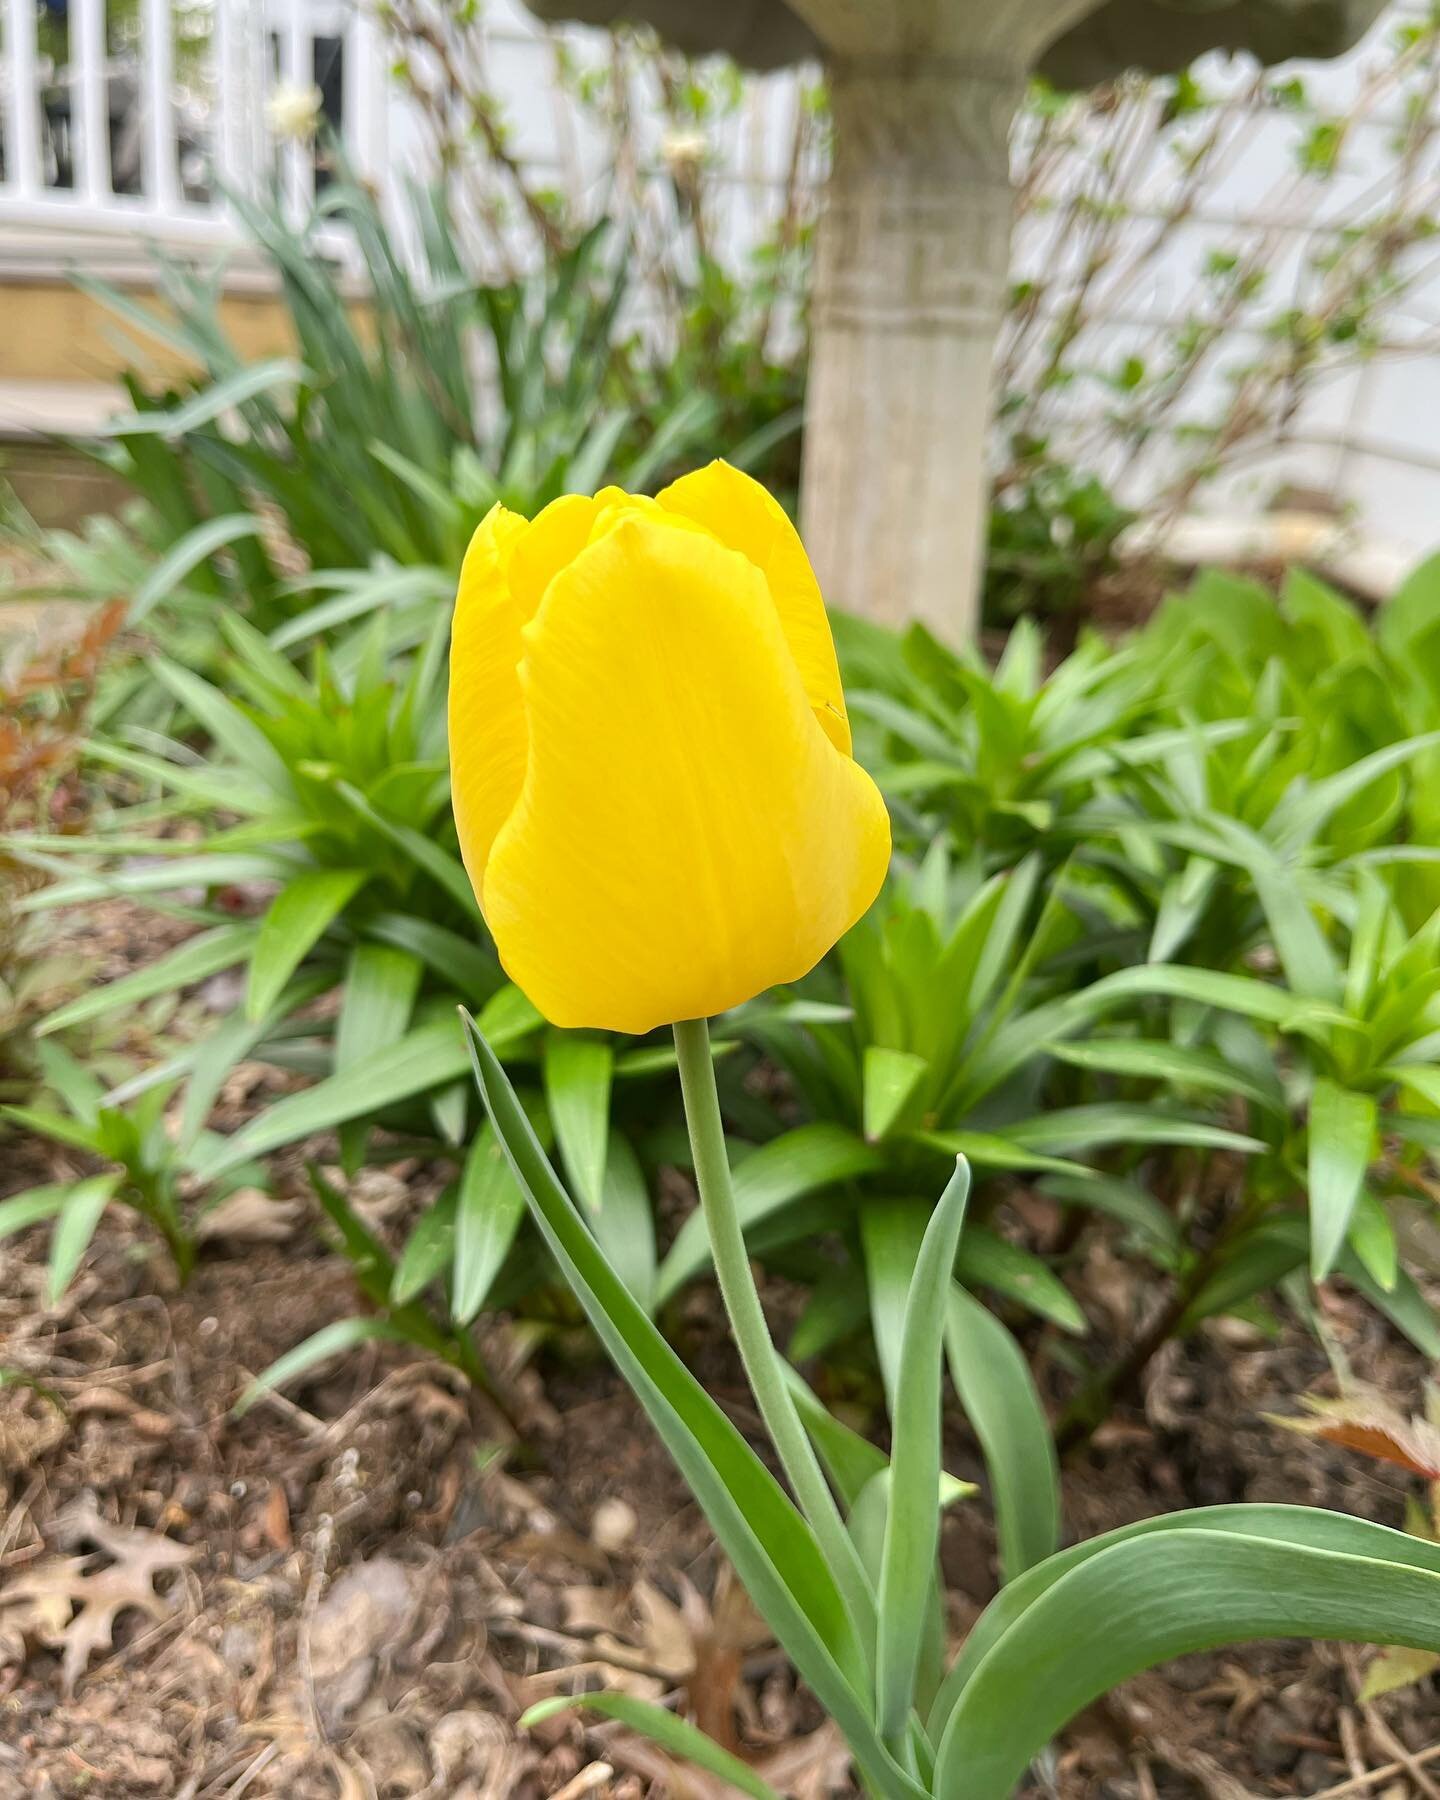 💛Happy Earth Day Y&rsquo;all!💛
.
Are you celebrating with some gardening and a smile?
.
One thing that makes me smile is this single yellow tulip. Daniel bought a few for me years ago and I brought it from our Brooklyn apartment in 2020. It&rsquo;s